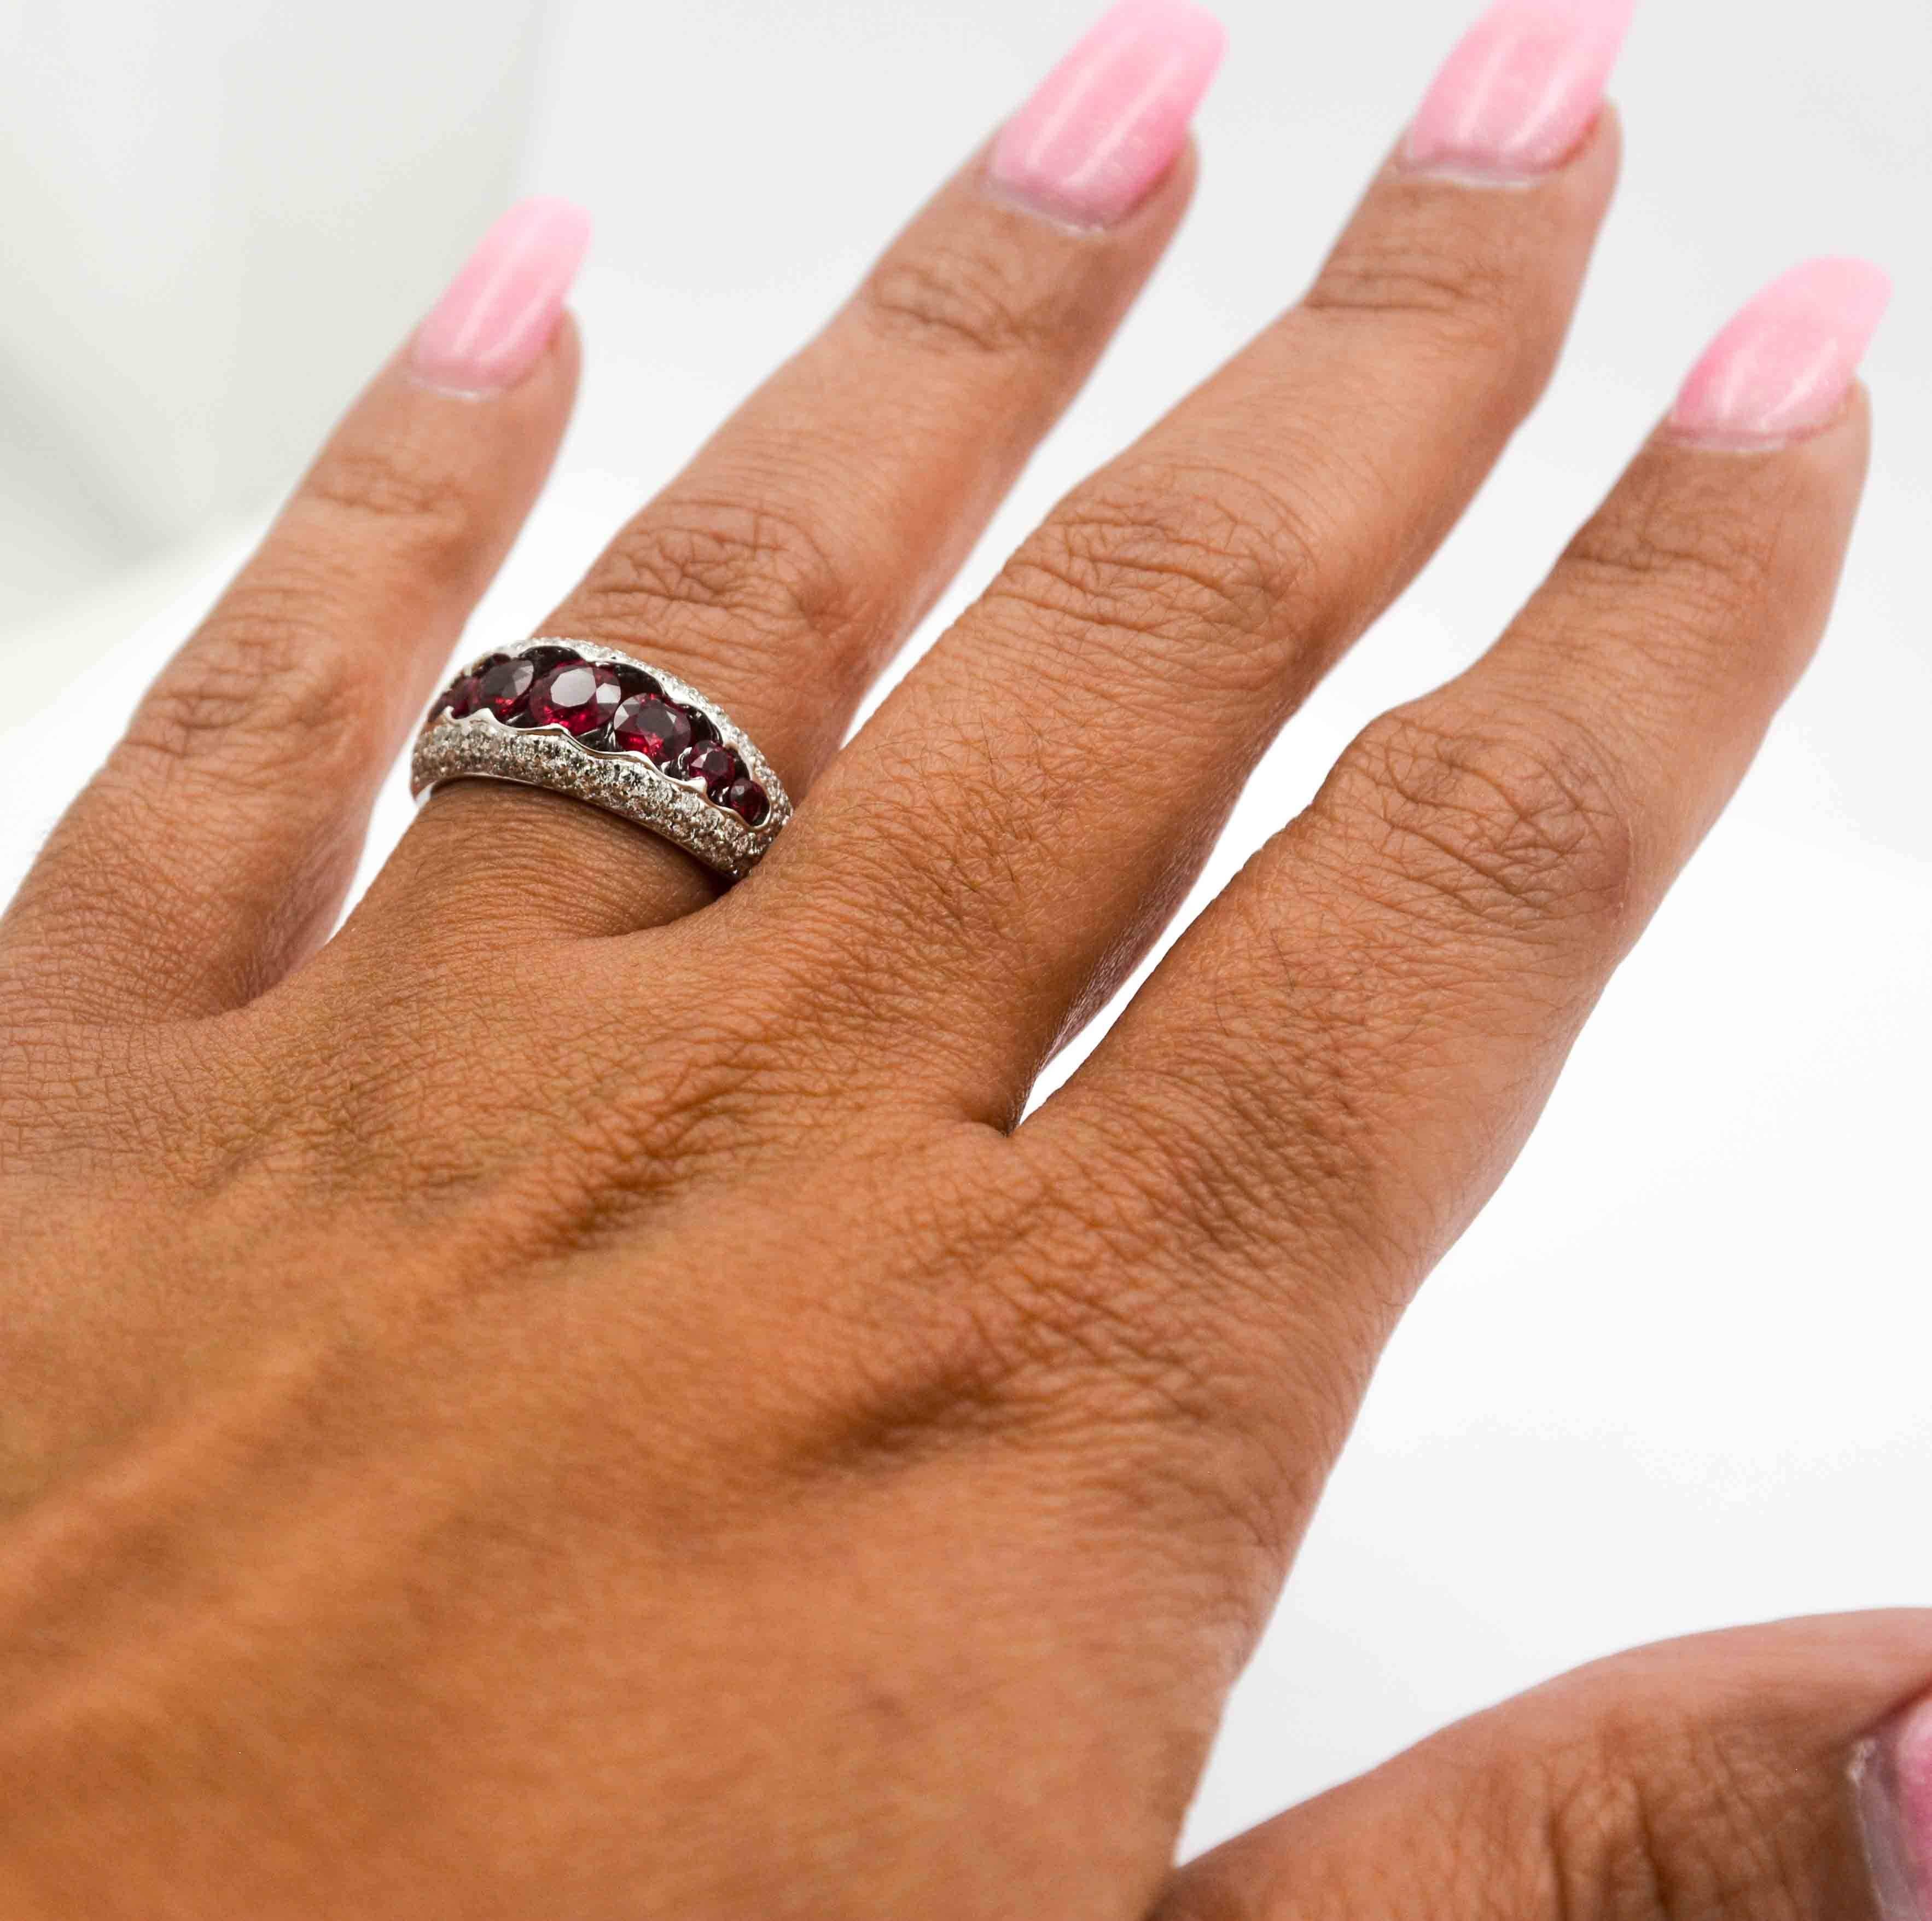 This amazing 18kt white gold ruby and diamond ring is centered with seven round brilliant cut rubies set in an attractive scalloped channel.  The rubies have a vivid saturation with a medium tone.  The color is very intense and vibrant.  The rubies